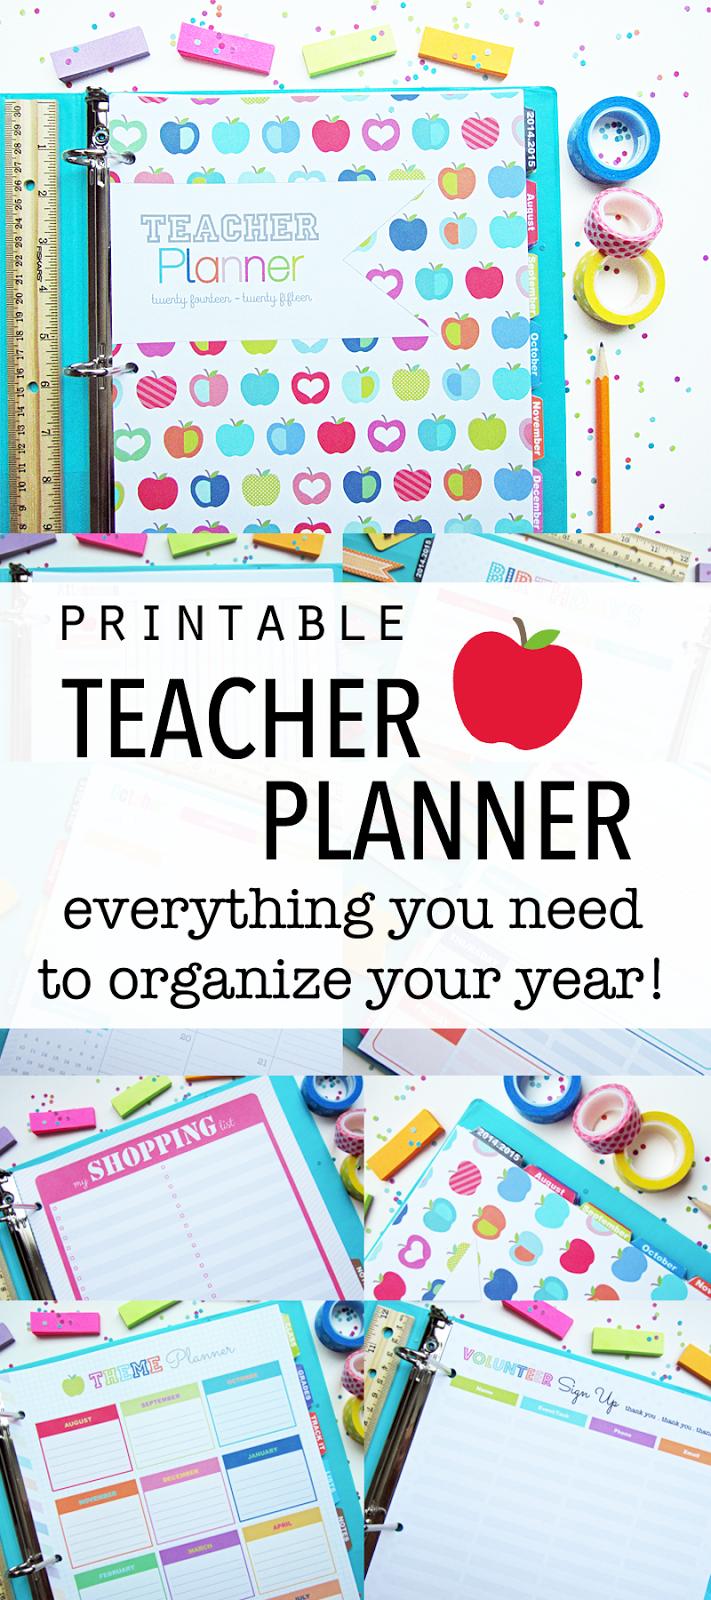 Clean Life and Home: The Teacher Planner!